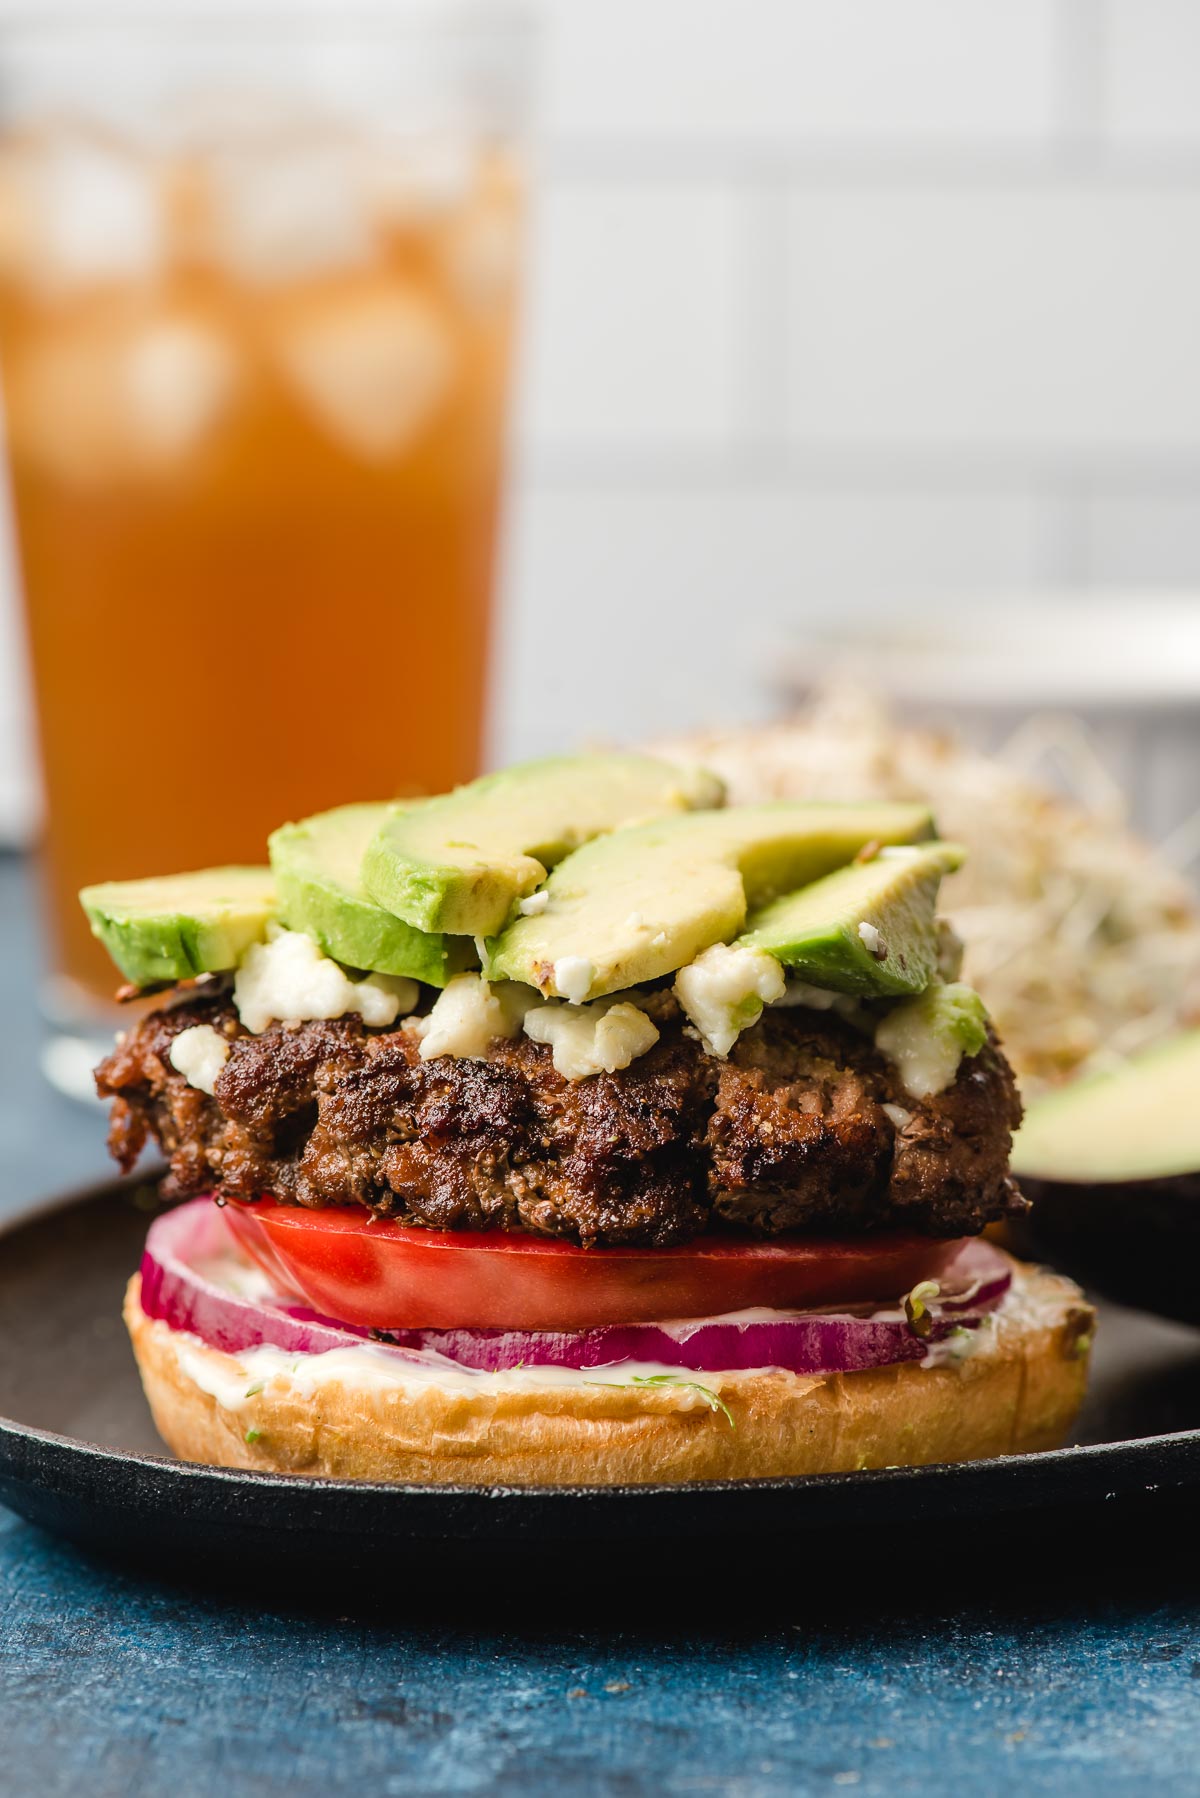 Open face burger stacked with tomato, red onion, queso fresco, and avocado.